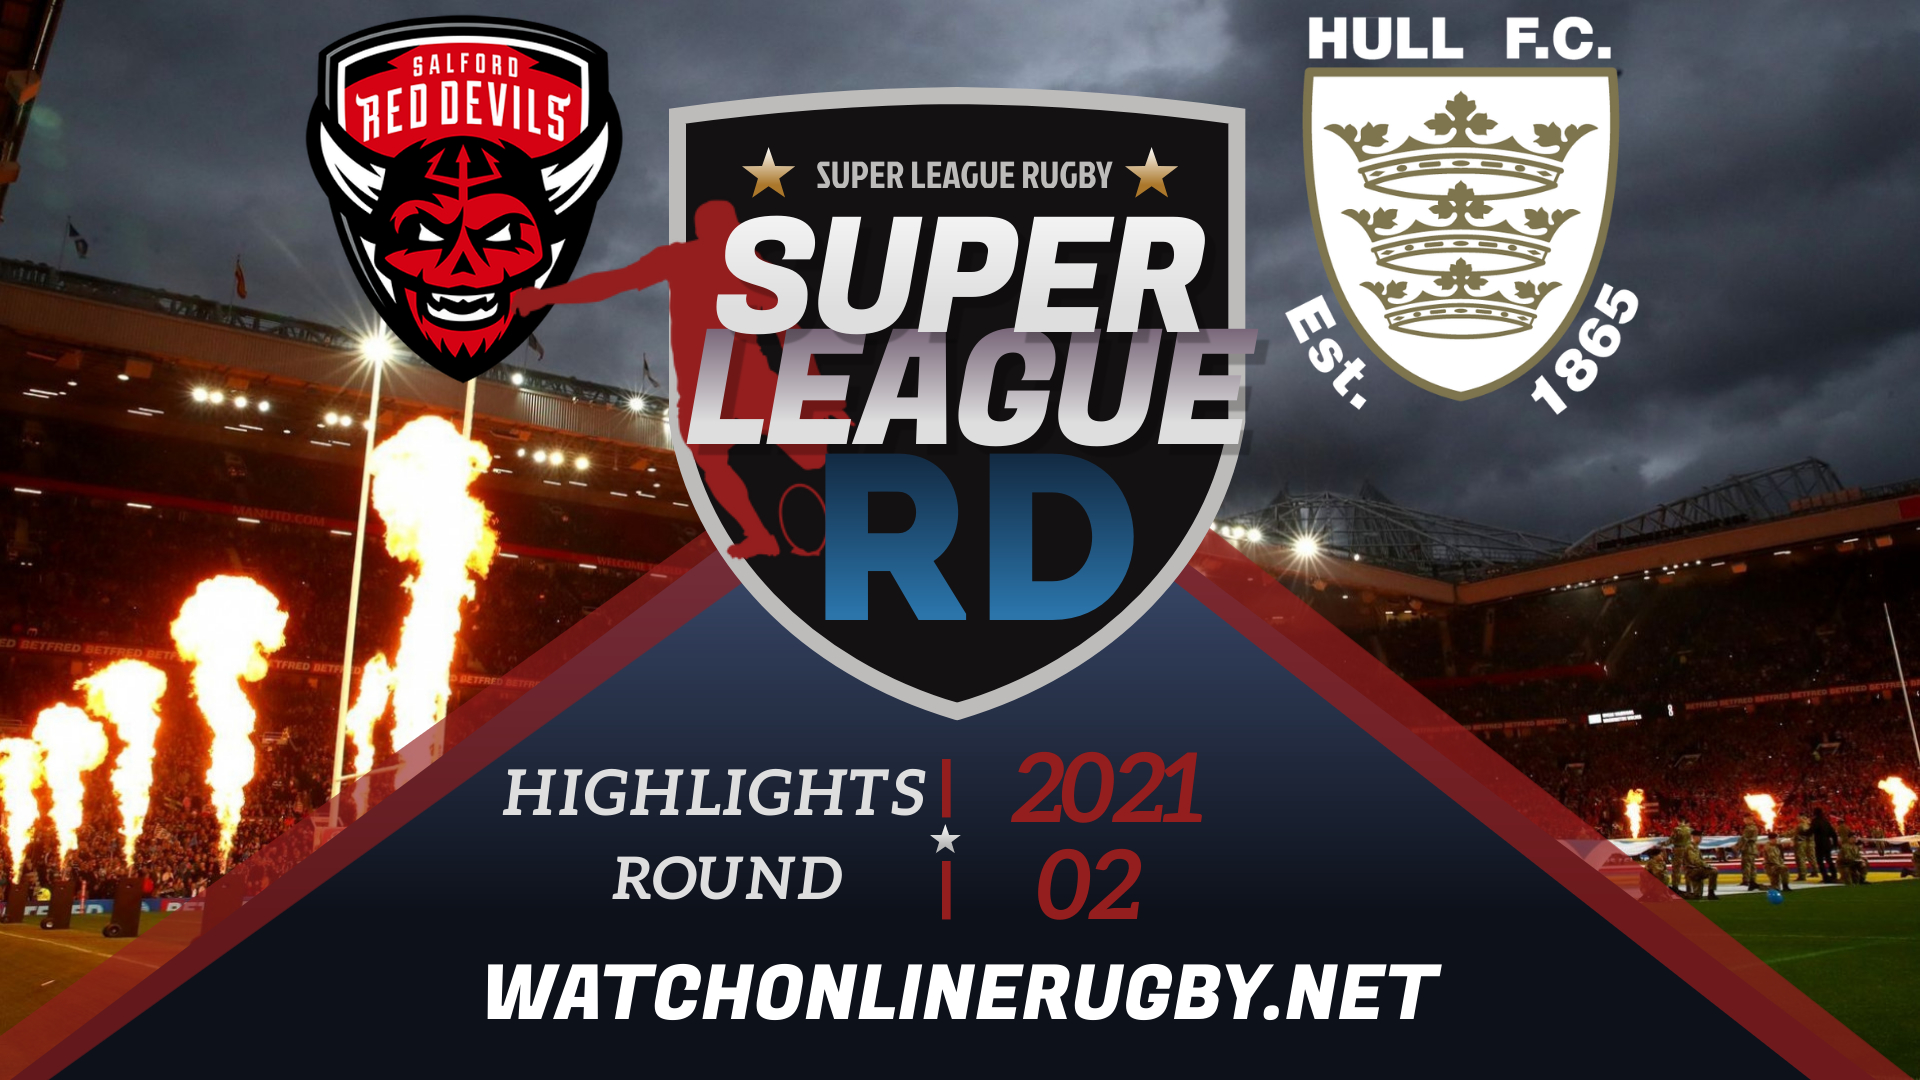 Red Devils Vs Hull FC Super League Rugby 2021 RD 2